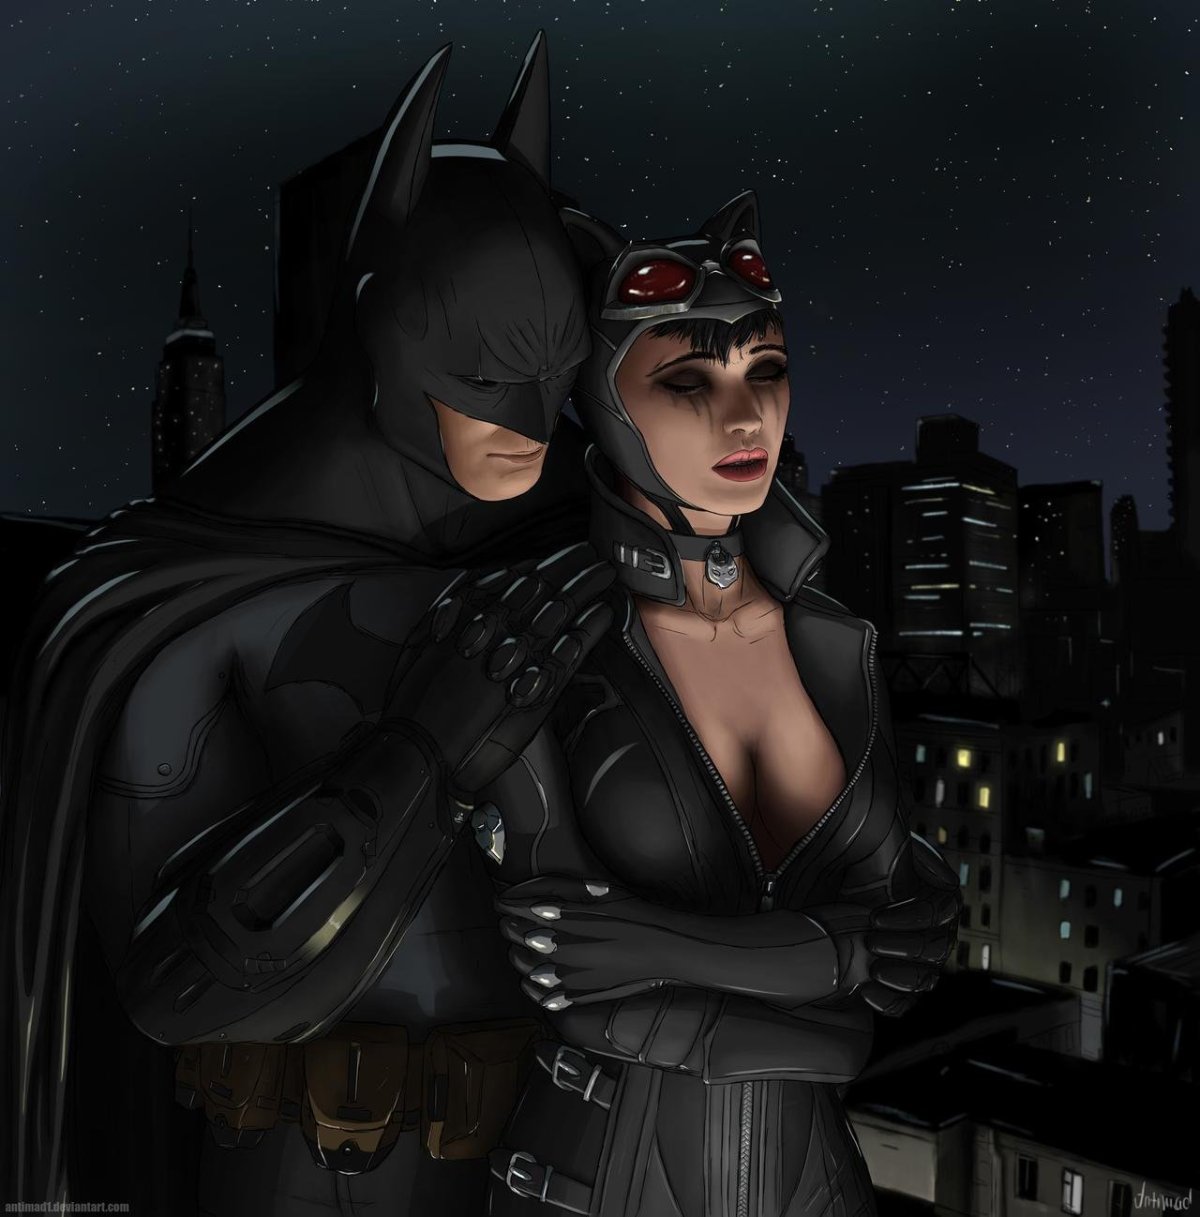 Batman and Catwoman.